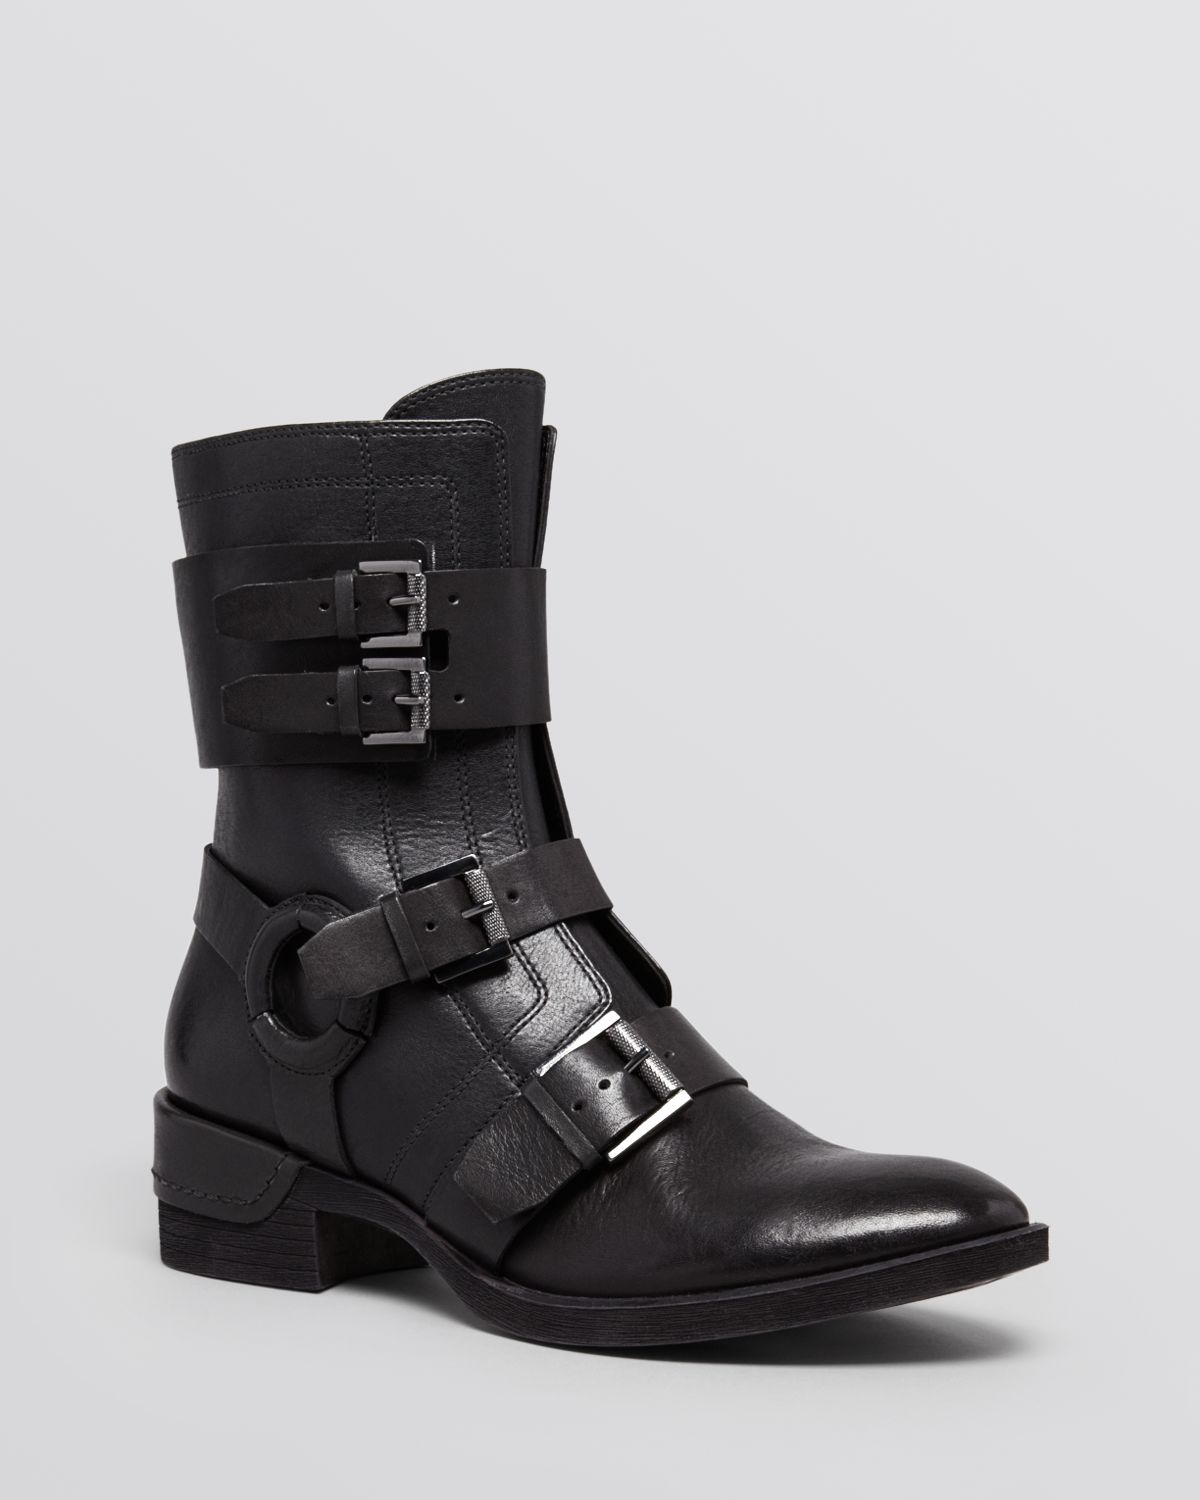 Lyst - Kenneth Cole Boots - Lawton Buckle in Black